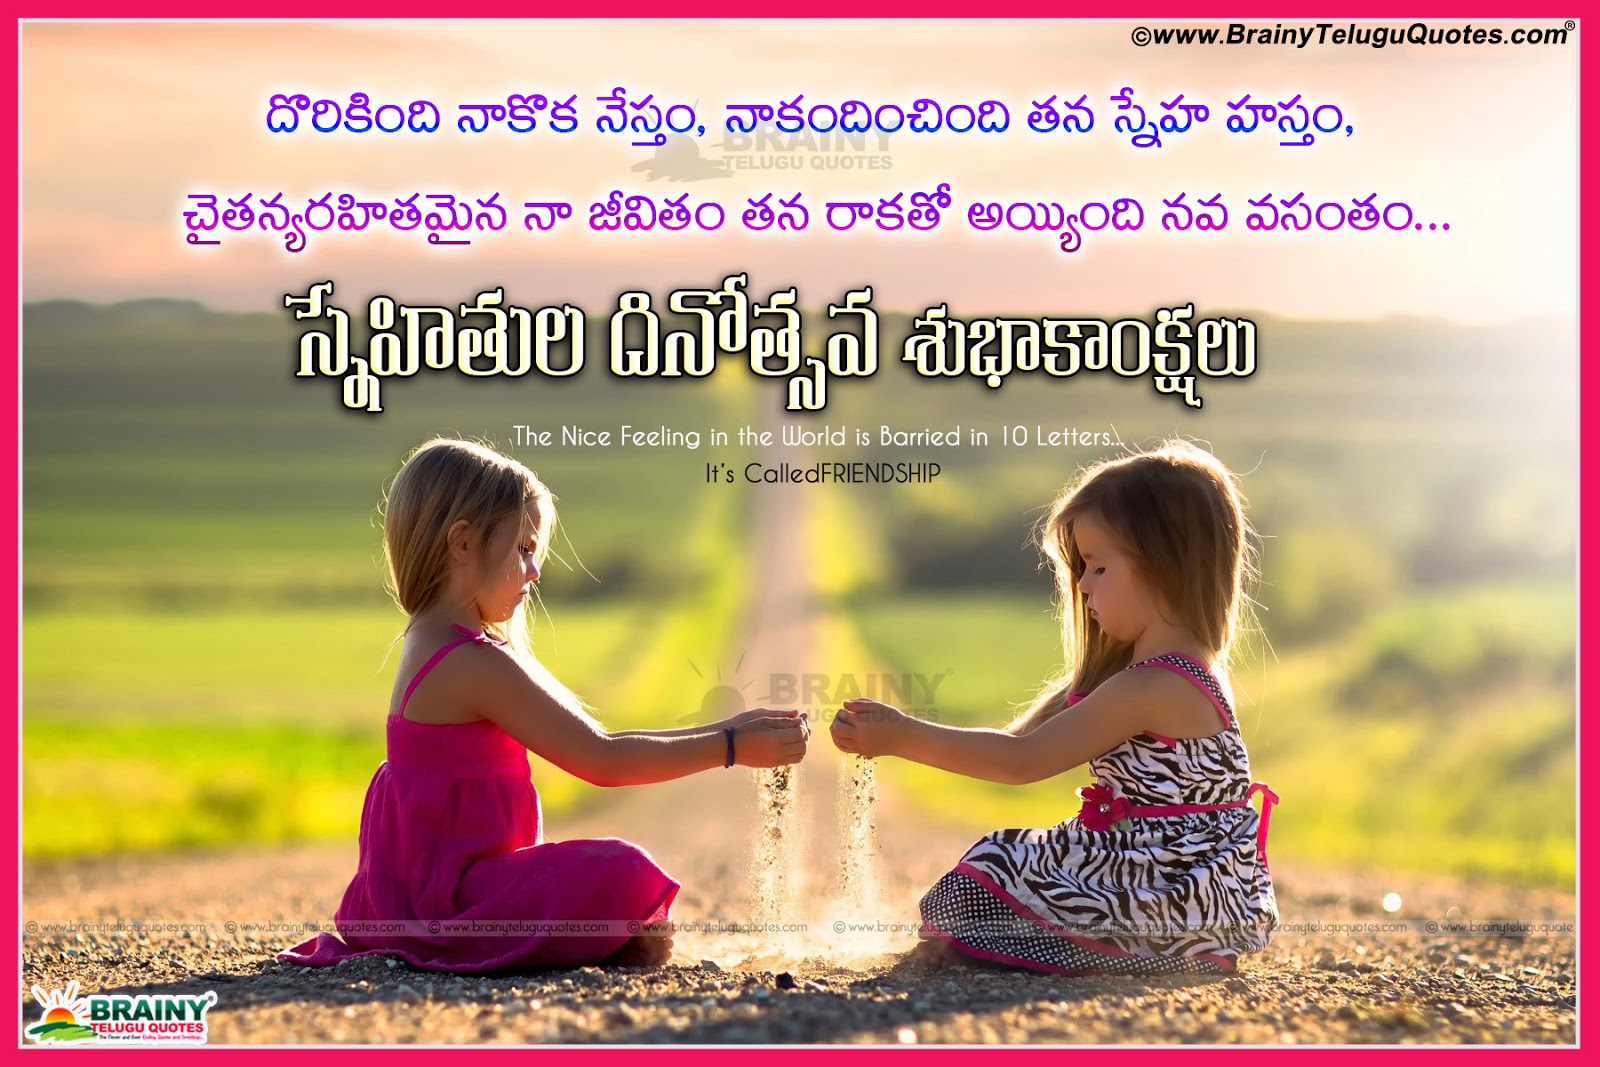 Best Friendshipday Quotes with hd wallpapers in Telugu ...